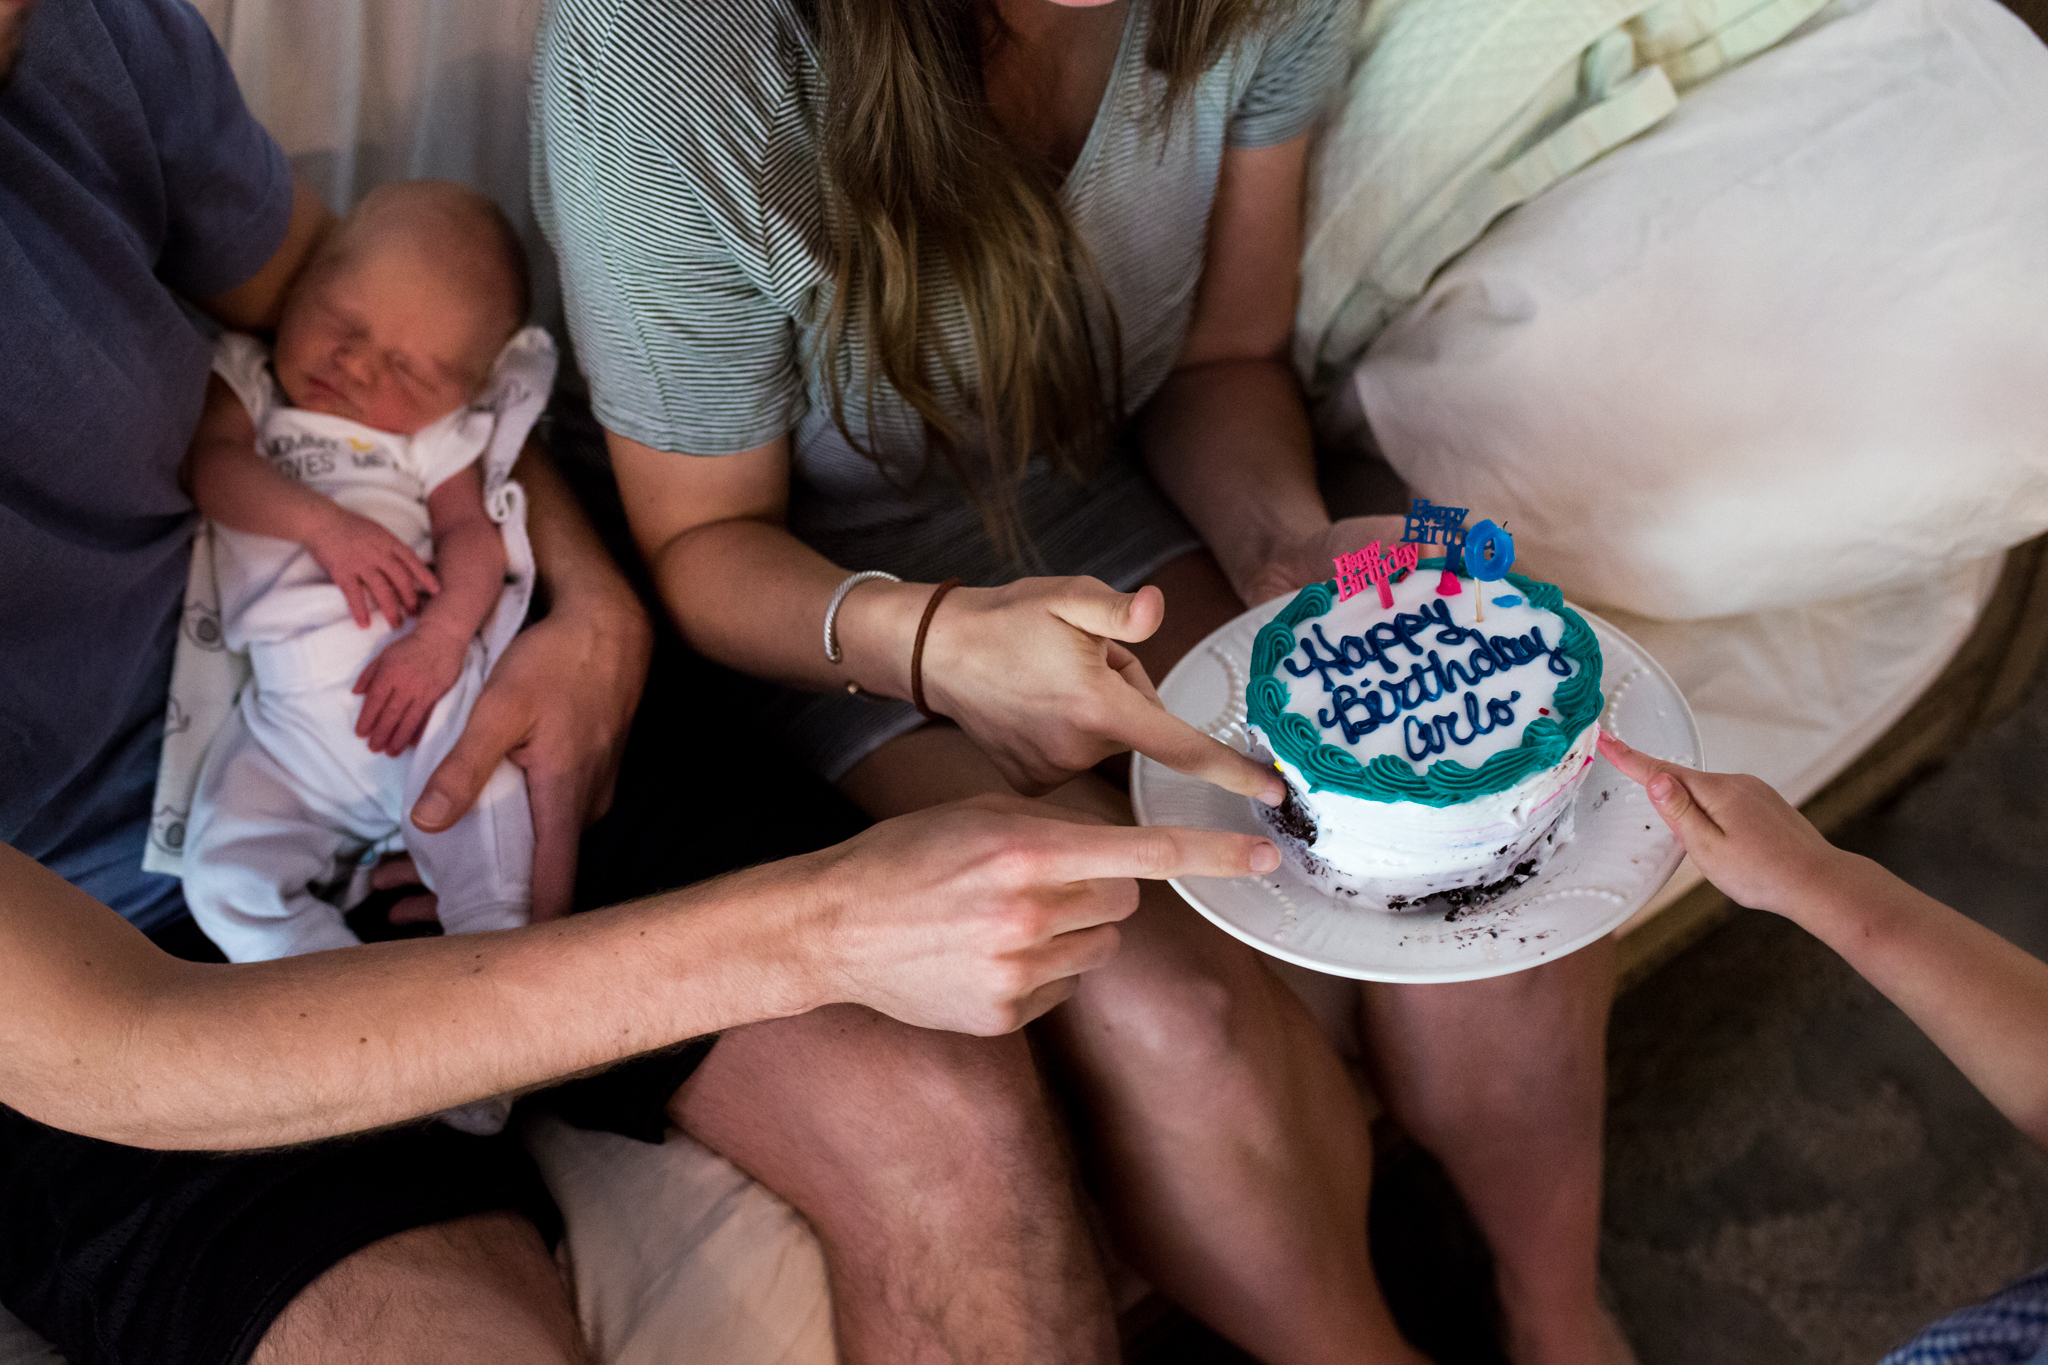 Lawren Rose Photography takes a picture of a family of 4 celebrating the birth of their new son Arlo. The picture shows 3 hands and fingers digging into a birthday cake while baby arlo lays nearby